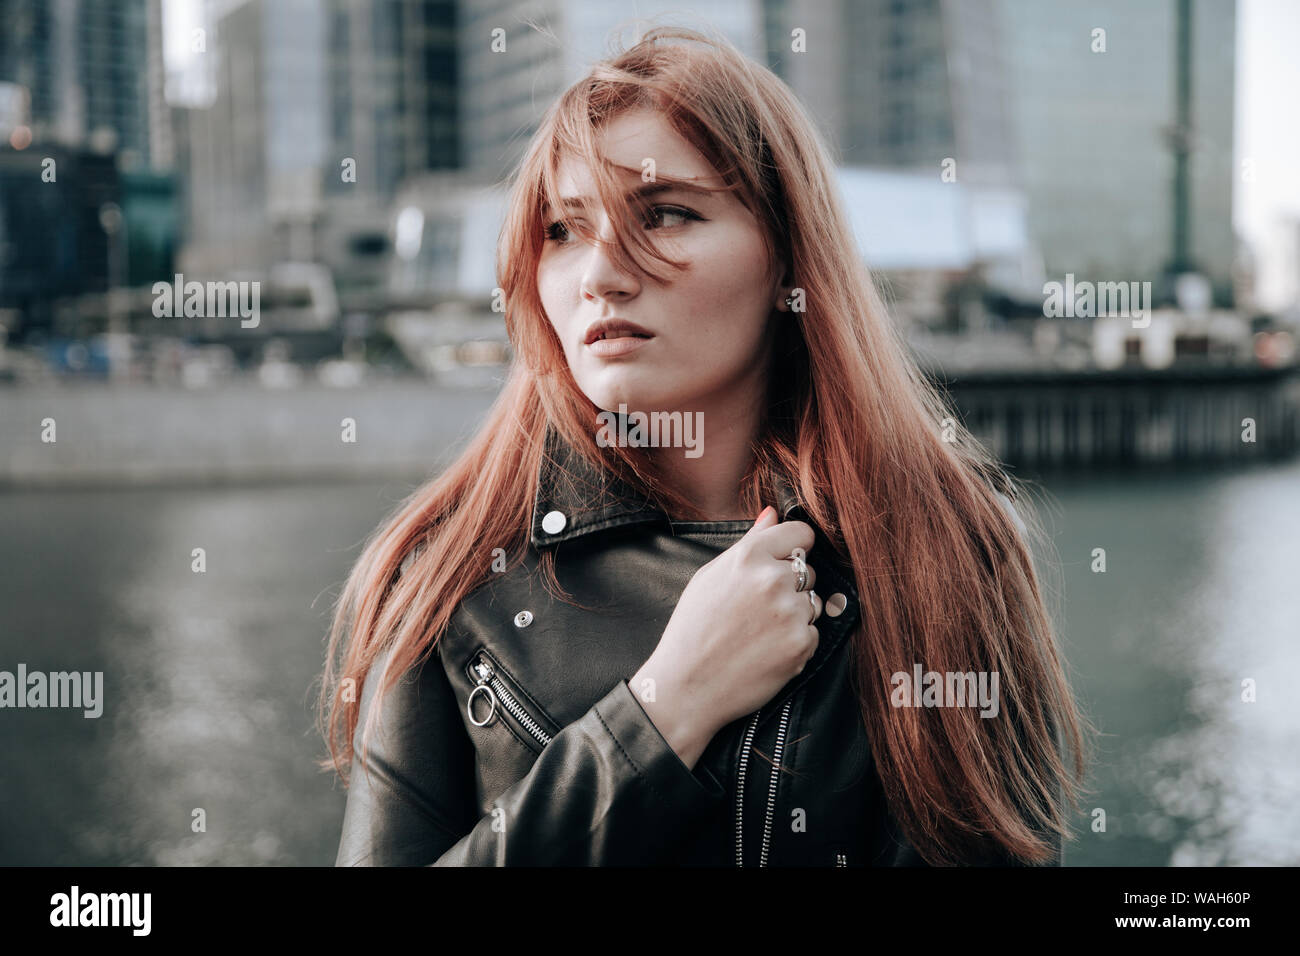 plus size woman with red hair wearing blue dress and leather black jacket Stock Photo